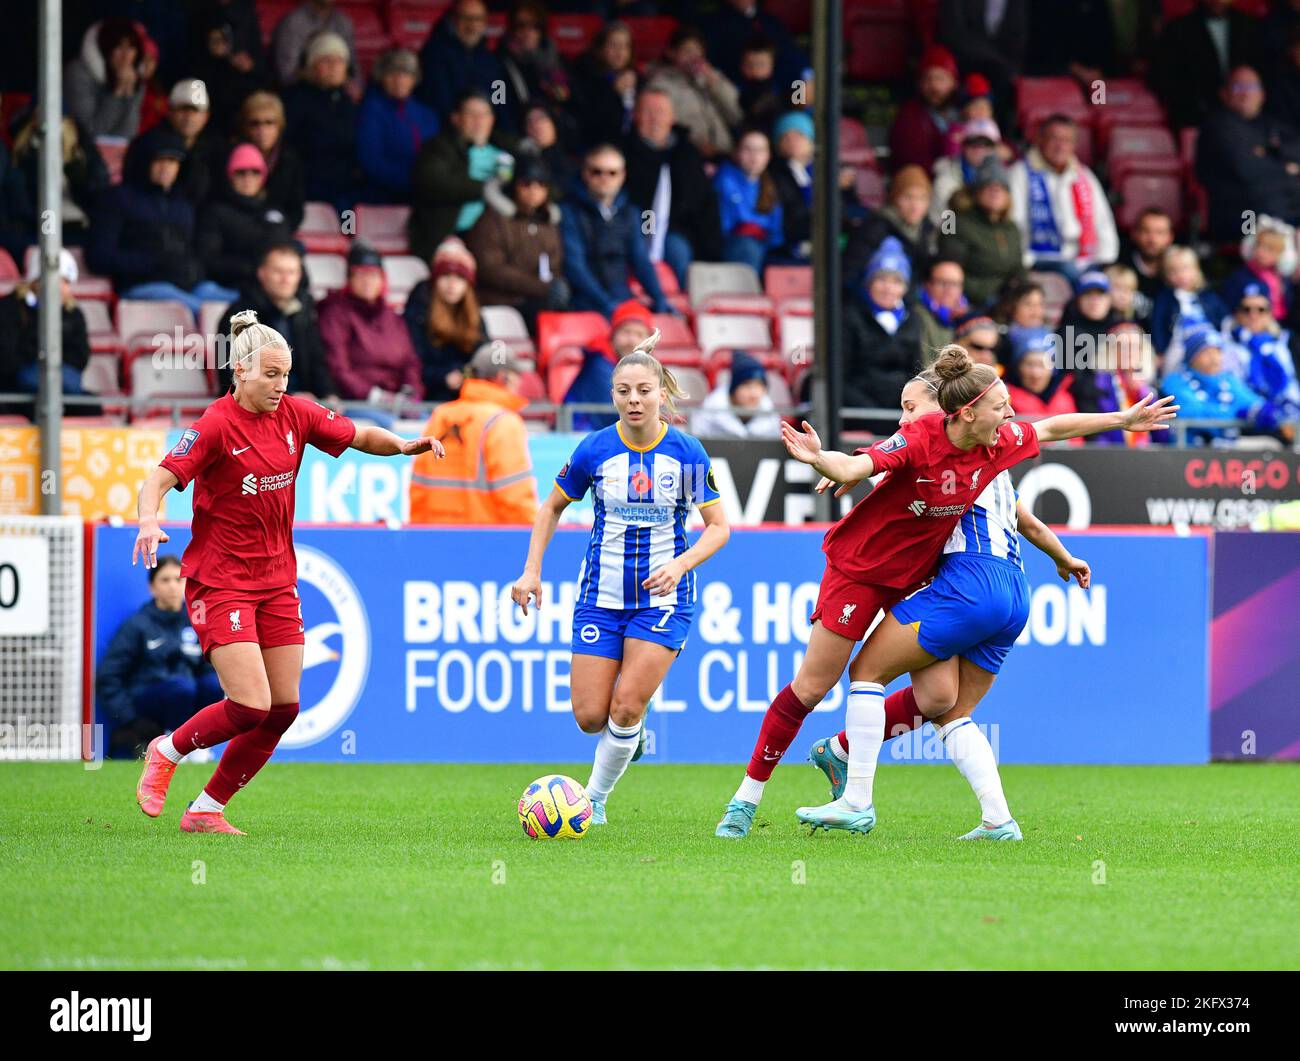 Crawley, UK. 20th Nov, 2022. Yana Daniels of Liverpool is played off the ball by Veatriki Sarri of Brighton and Hove Albion and Julia Zigiotti Olme of Brighton and Hove Albion during the FA Women's Super League match between Brighton & Hove Albion Women and Liverpool Women at The People's Pension Stadium on November 20th 2022 in Crawley, United Kingdom. (Photo by Jeff Mood/phcimages.com) Credit: PHC Images/Alamy Live News Stock Photo